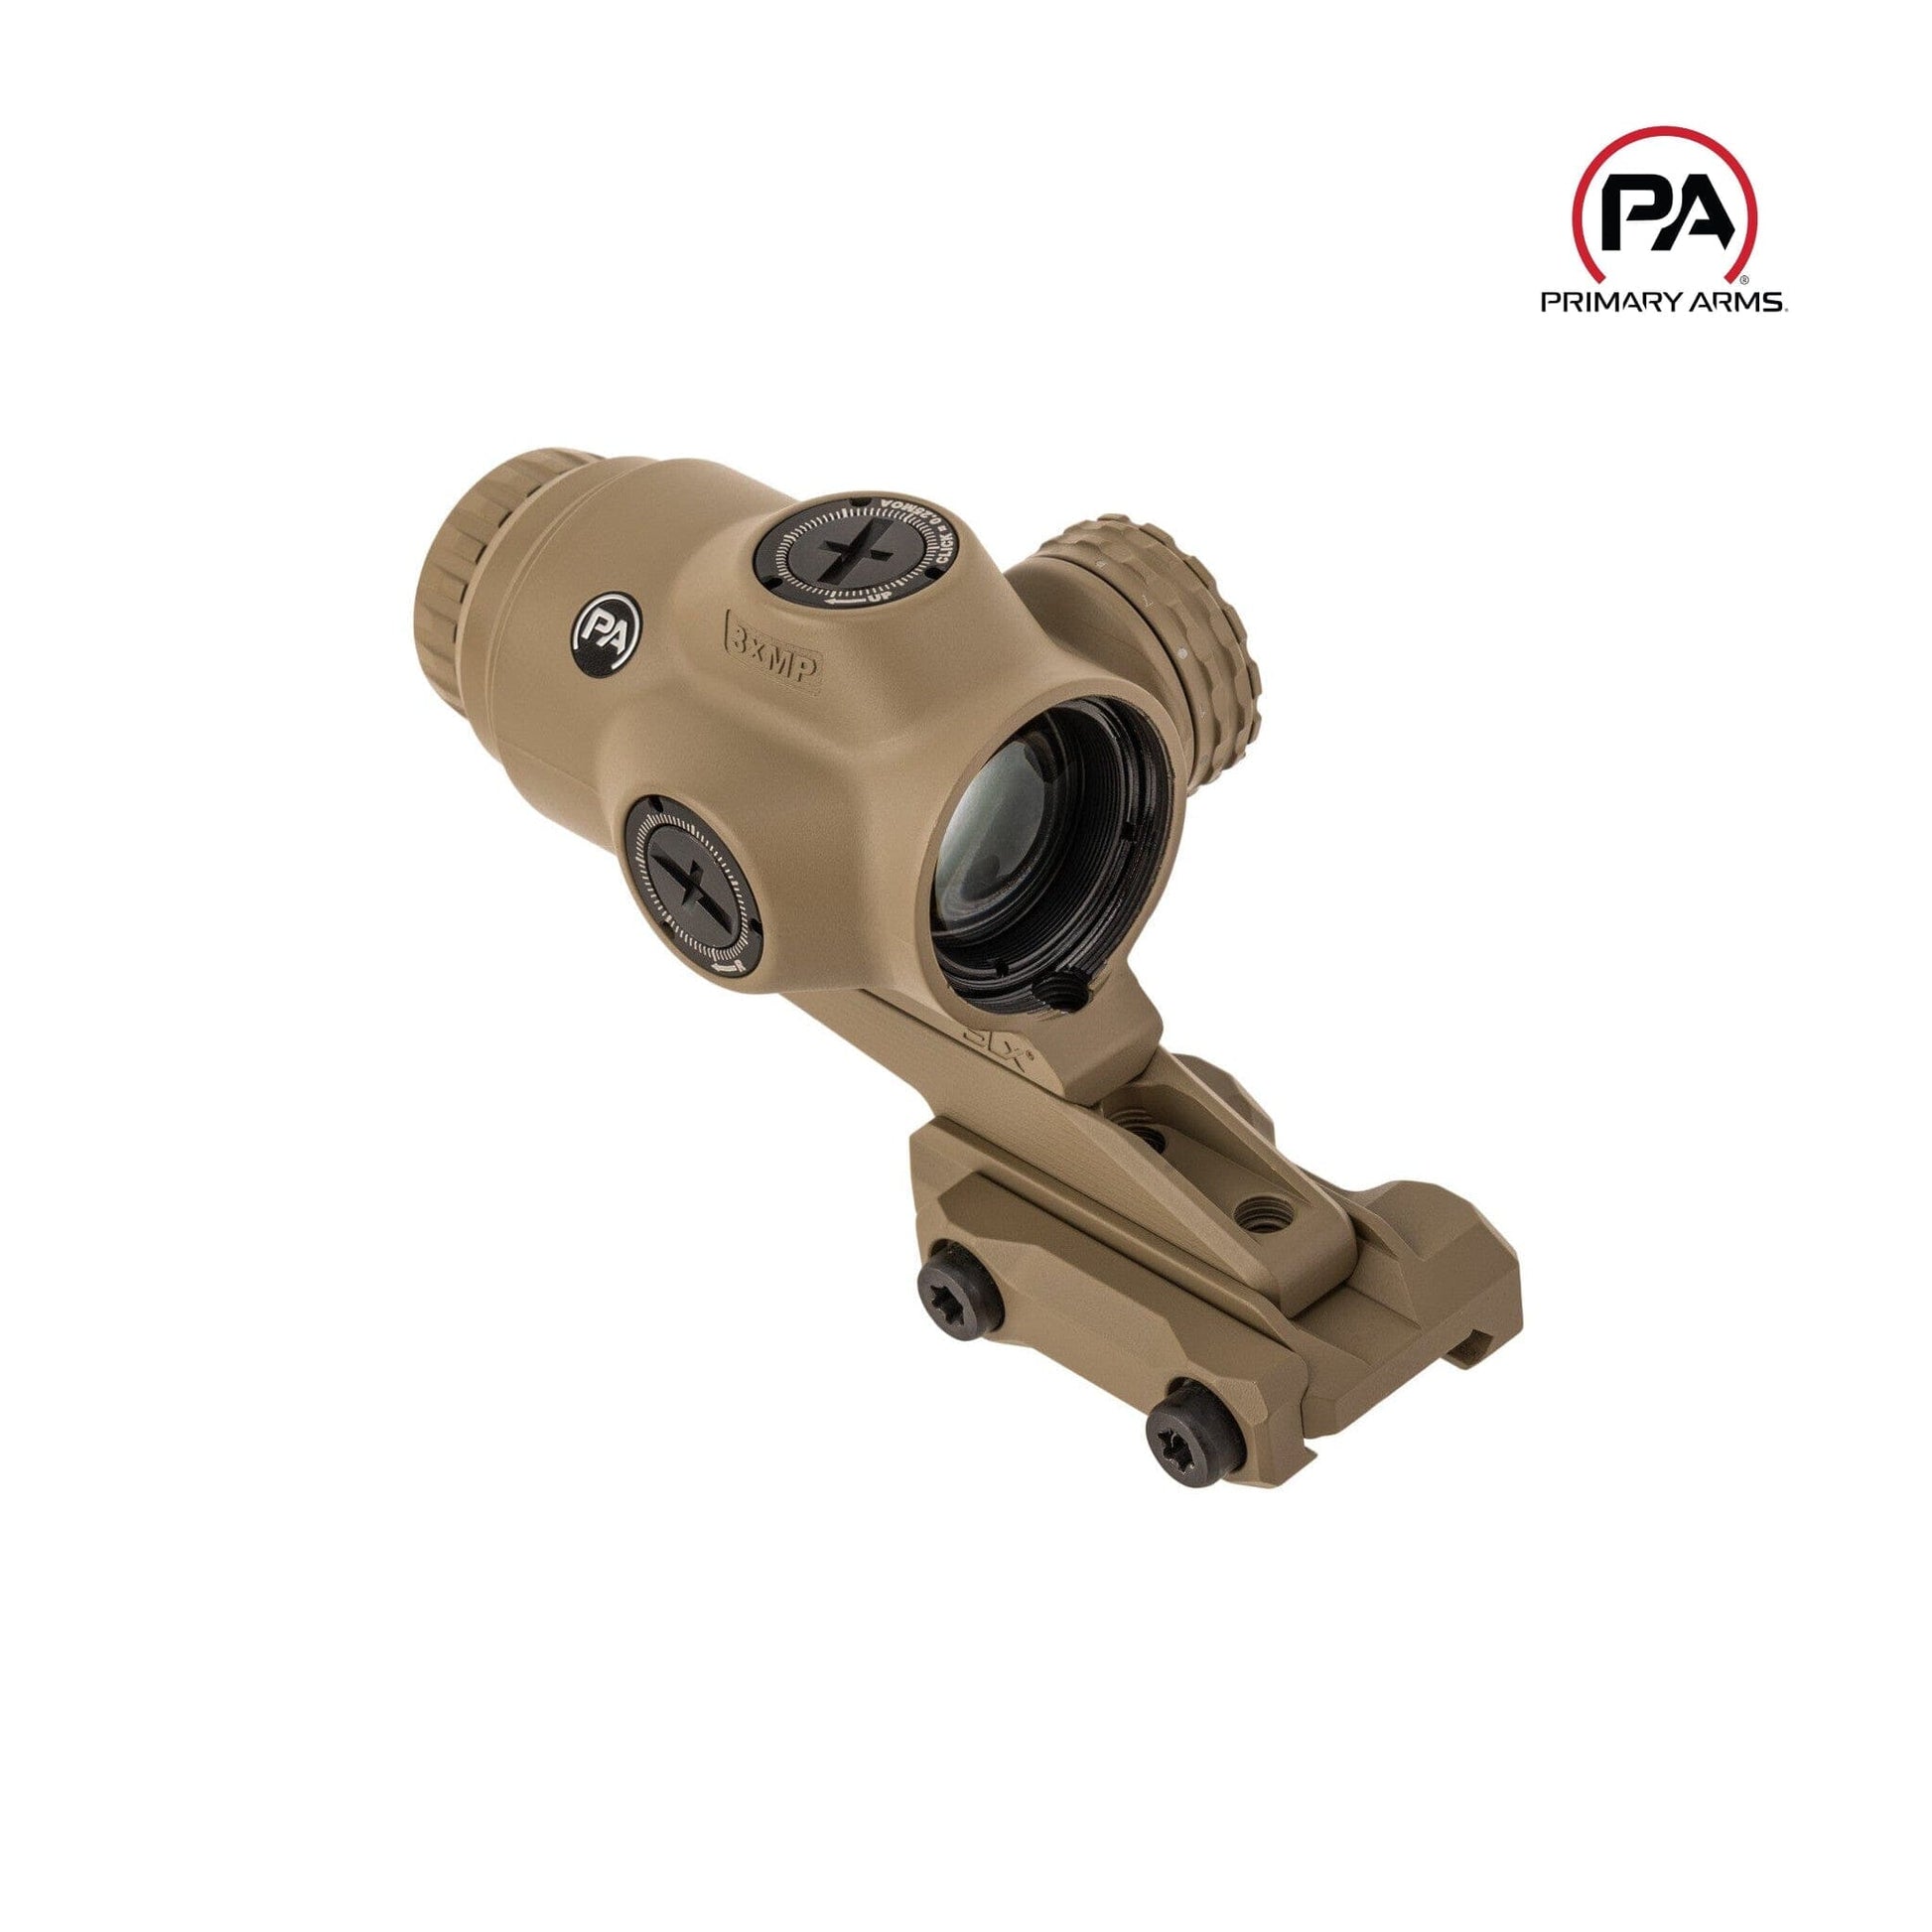 Primary Arms SLx 3x MicroPrism Sight - Red ACSS RAPTOR 5.56/.308 - Yard Reticle - FDE Prism Rifle Scope Primary Arms 